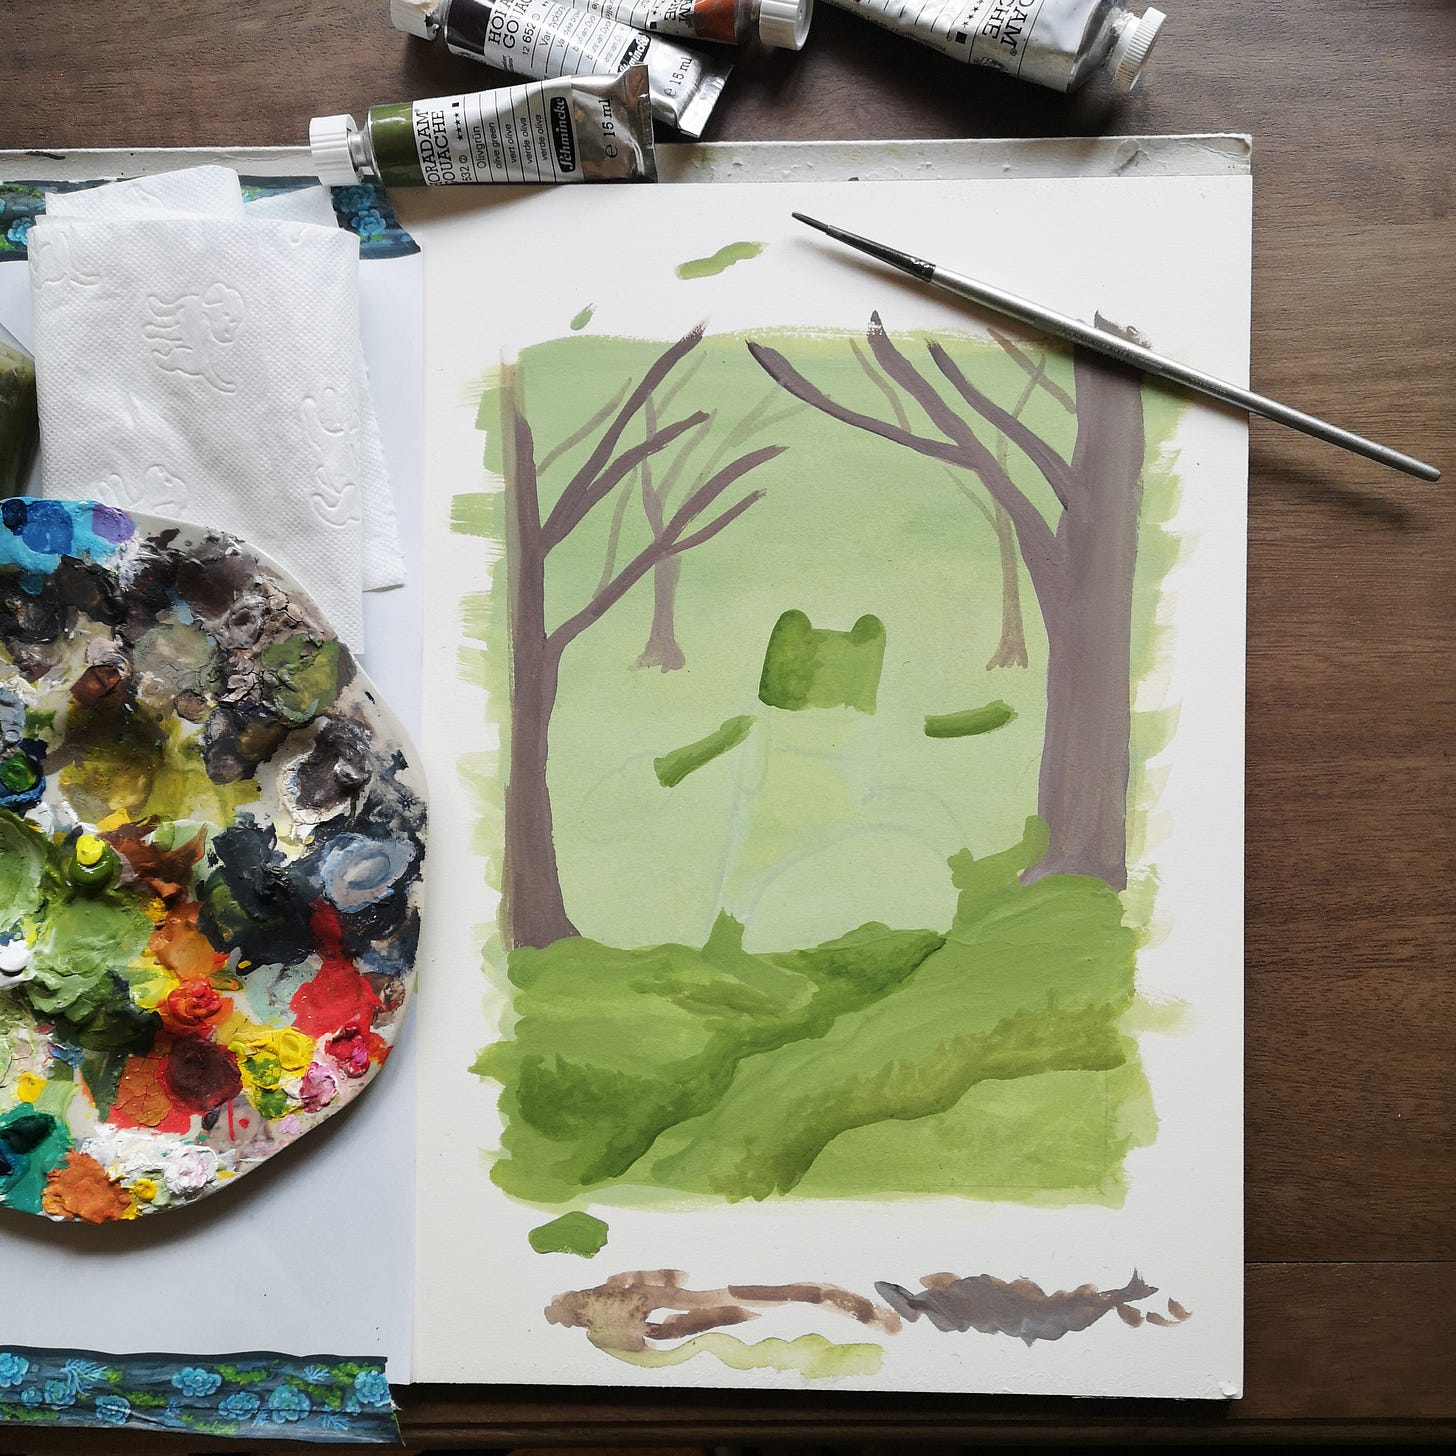 A paint palette and some tubes of gouache lie beside a painting in progress, which has a green background and what appears to be a jaunty green frog marching along the mossy ground beneath some trees.